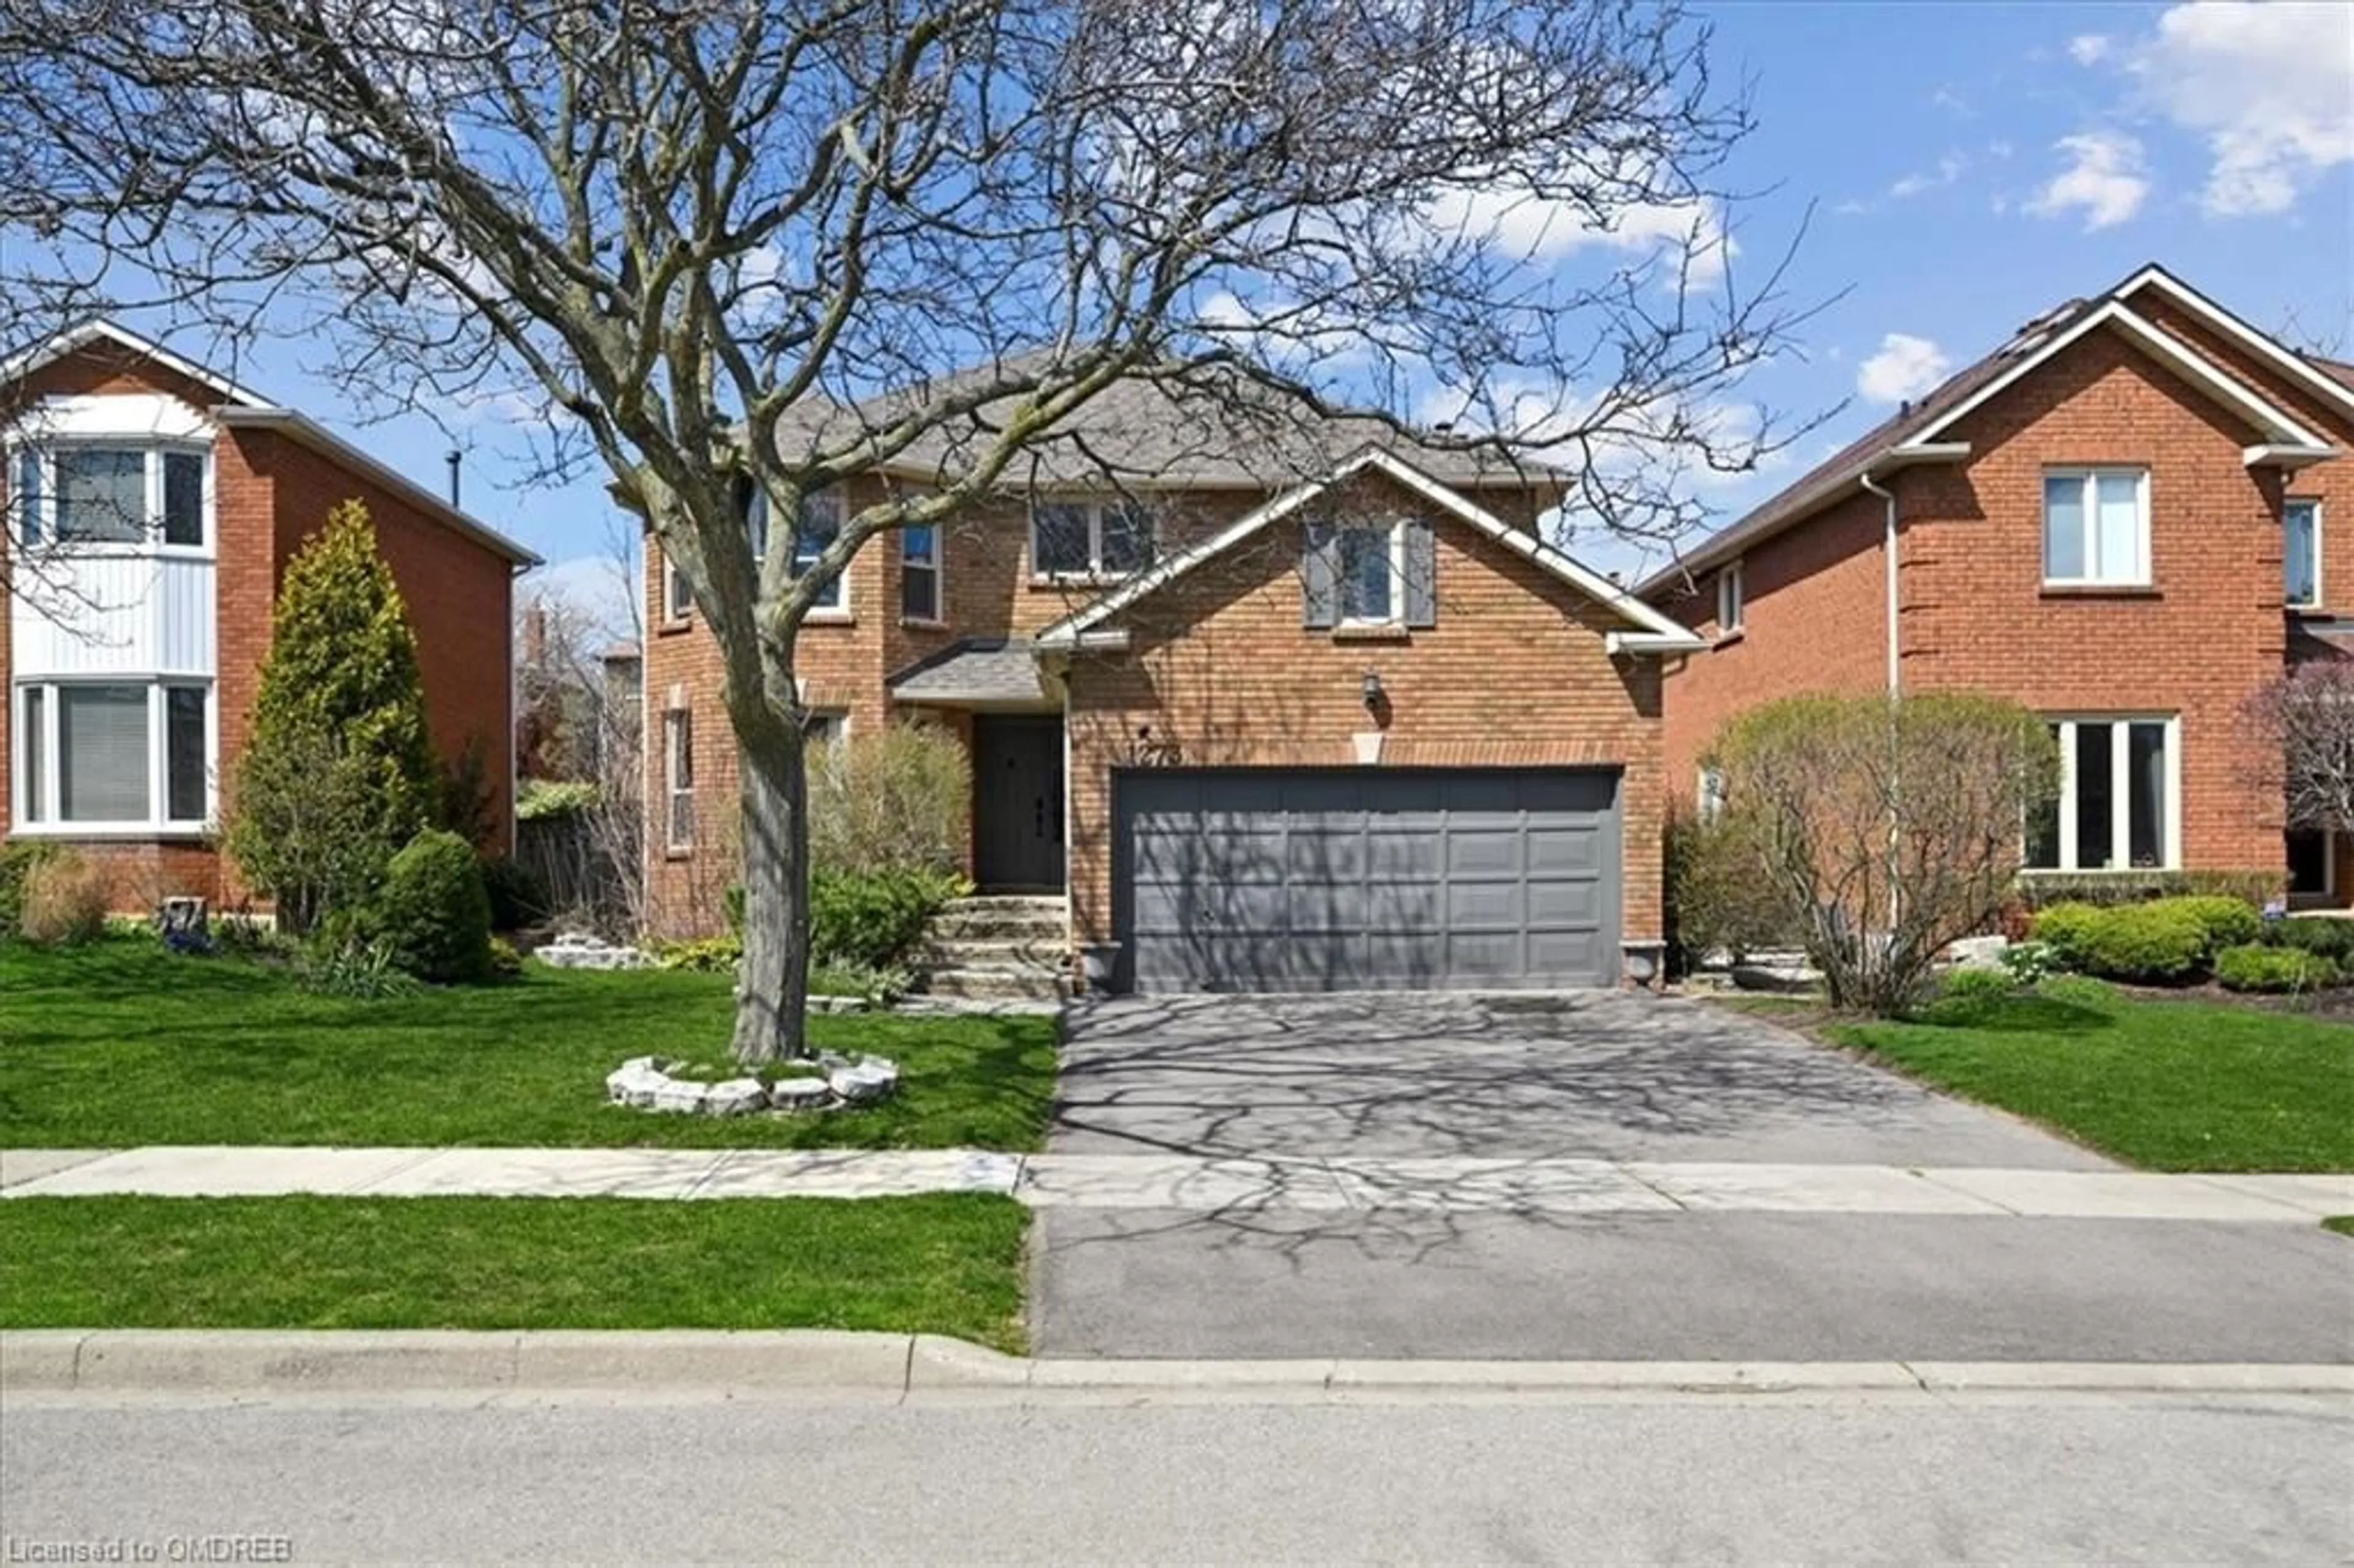 Home with brick exterior material for 1273 Greeniaus Rd, Oakville Ontario L6J 6Y6